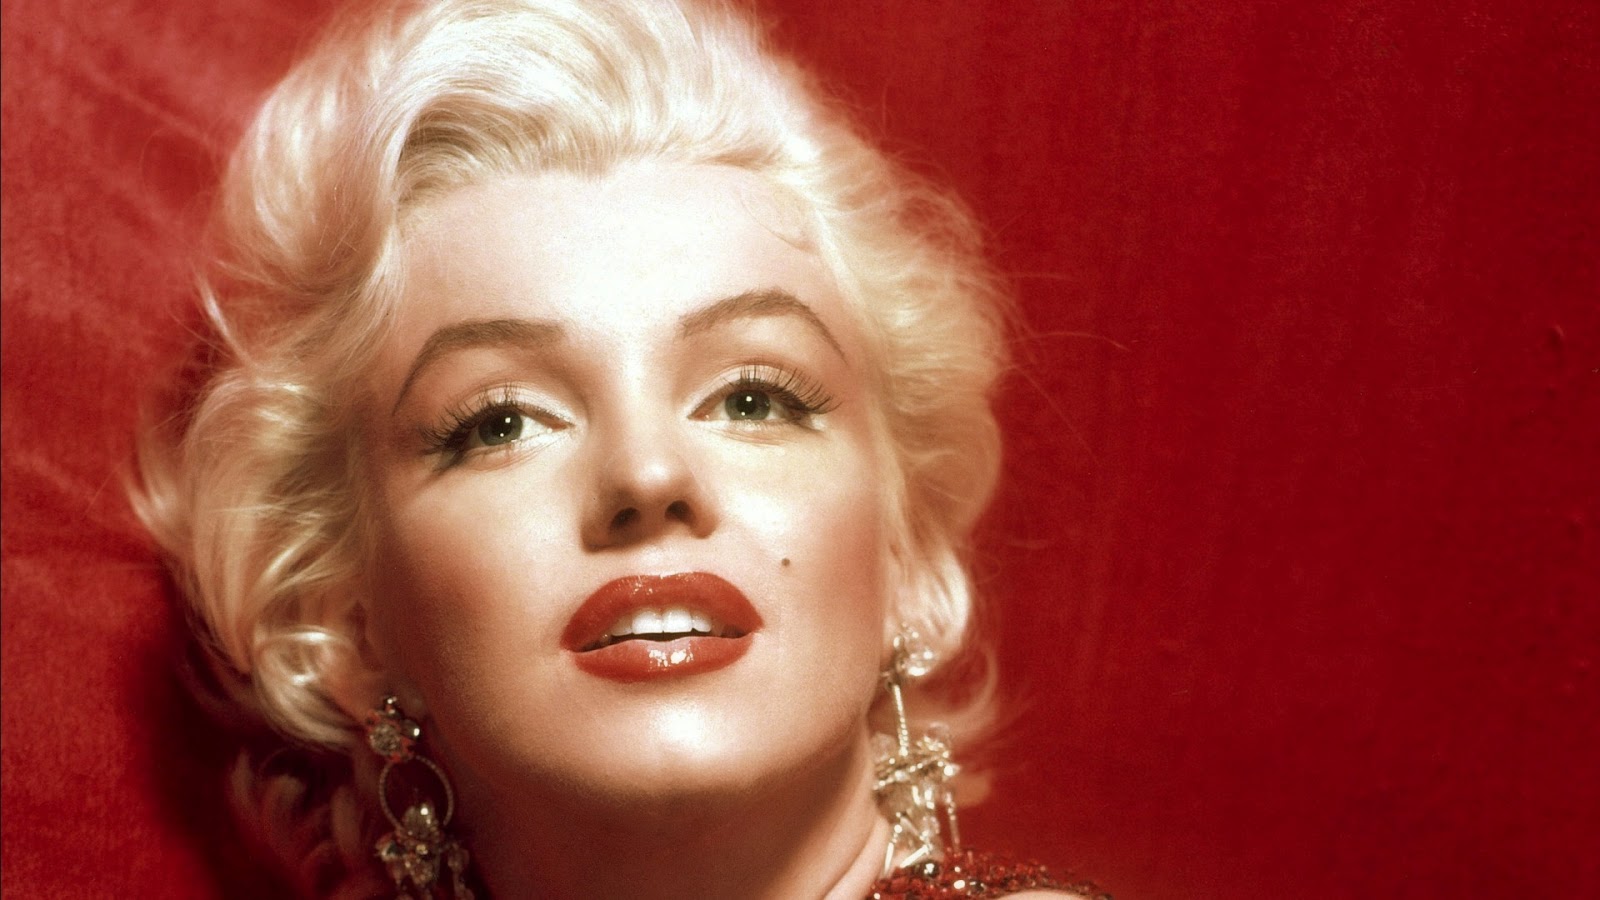 Concierge4Fashion: Marilyn Monroe the most beautiful woman in the world ...